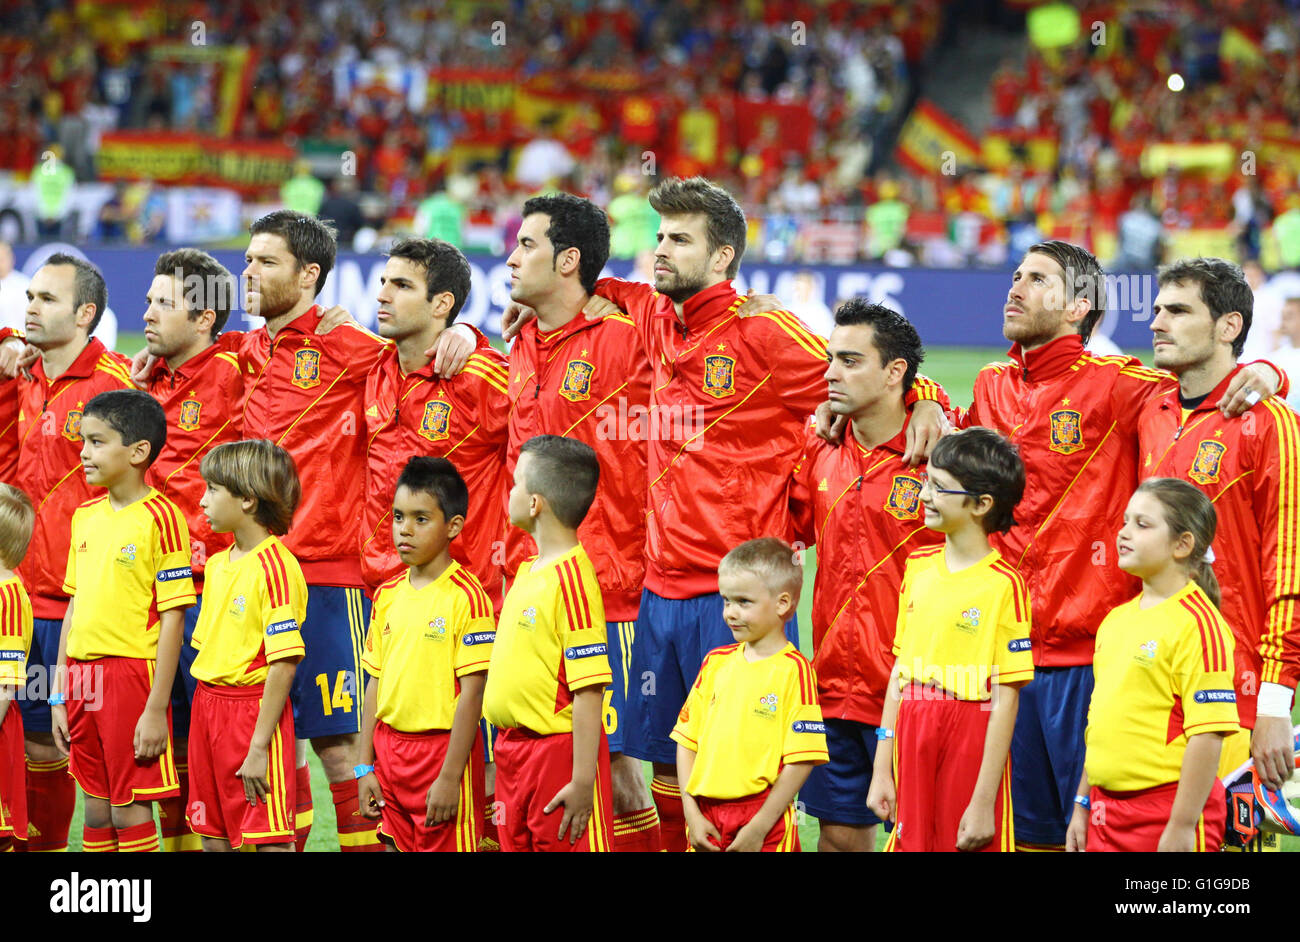 Players of Spain football team sing the national anthen before UEFA EURO 2012 Final game against Italy at Olympic stadium Stock Photo